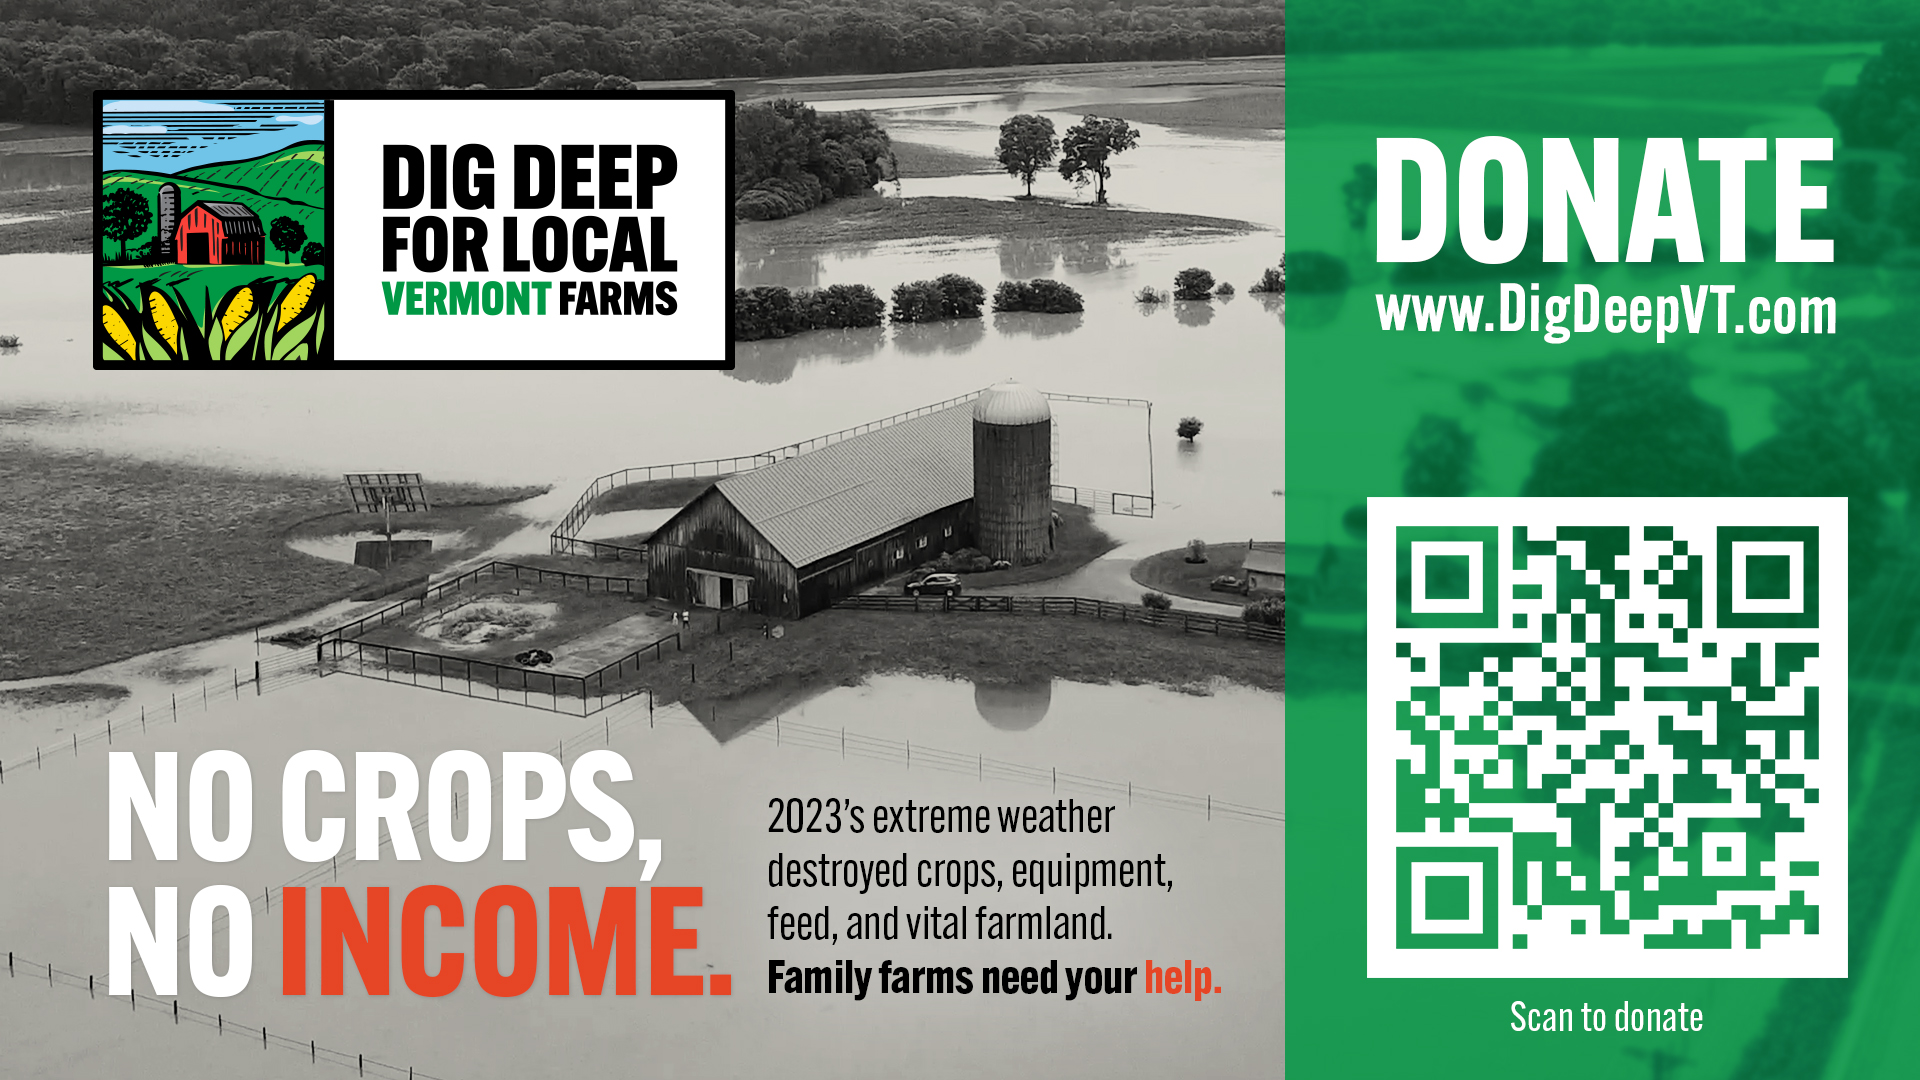 banner ad for Dig Deep for Local Vermont Farms, encouraging you to donate to Vermont Farms that were impacted by the flooding in 2023. Donate at digdeepvt.com